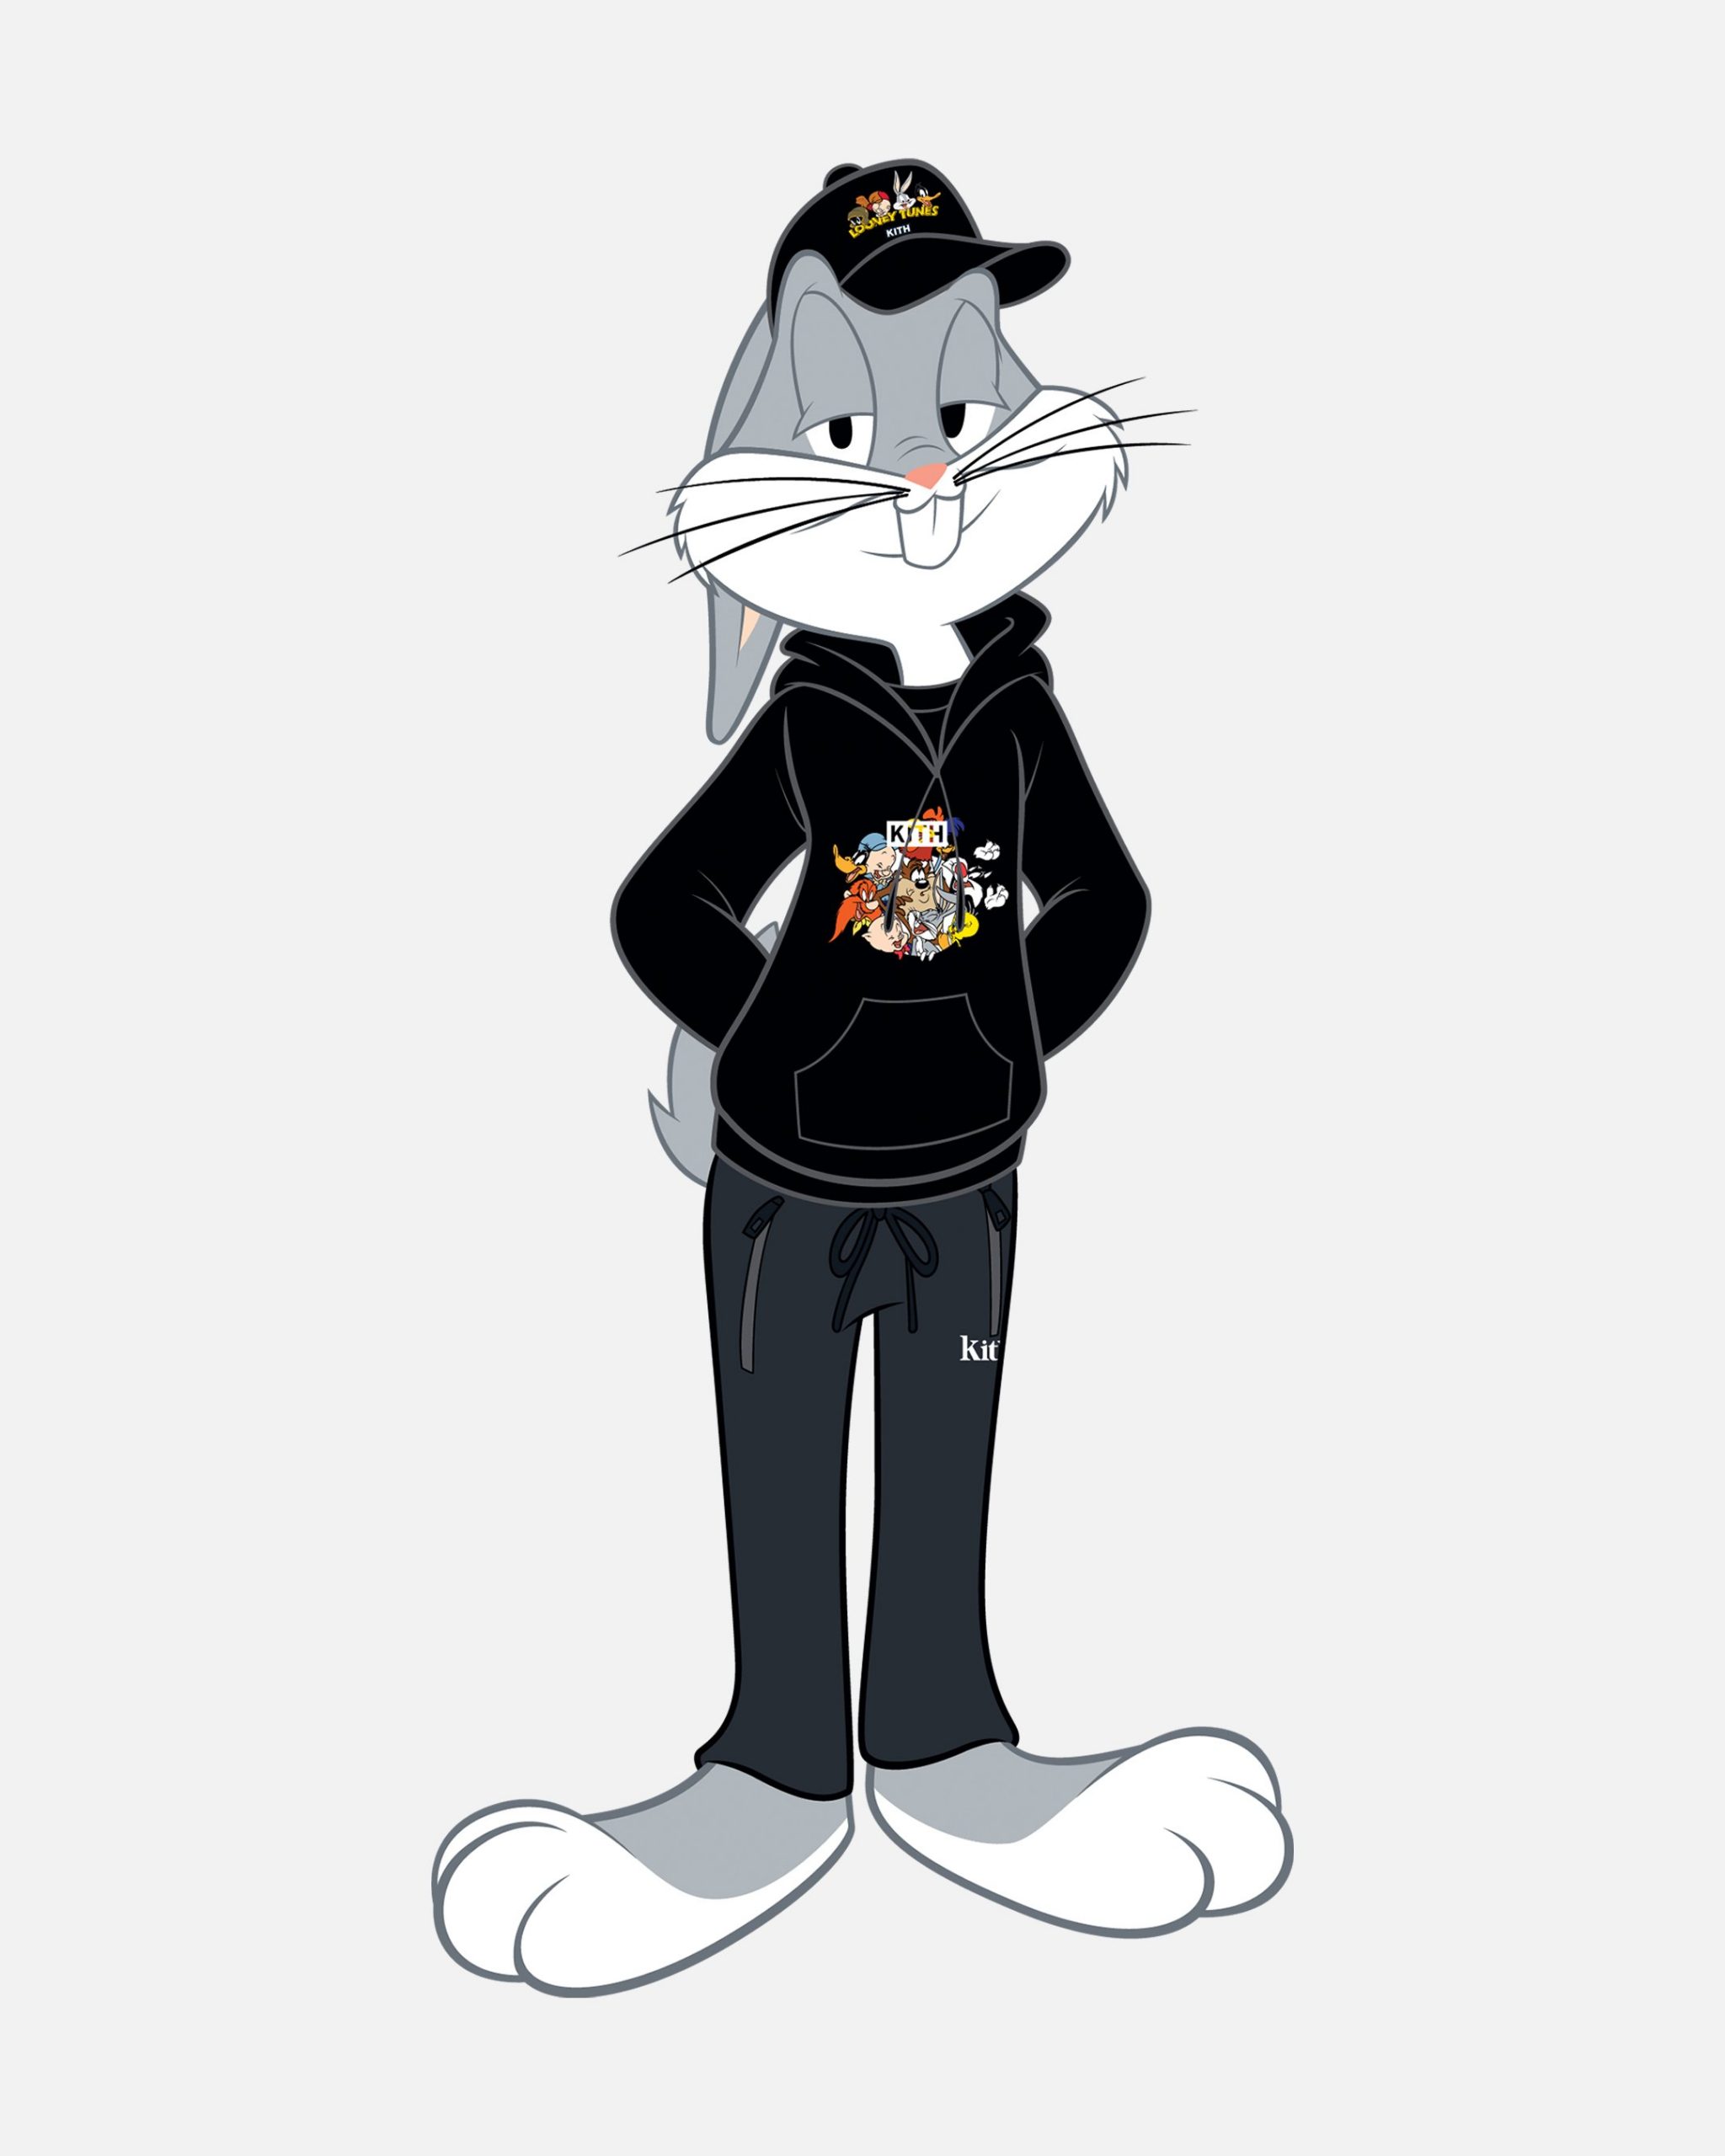 In commemoration of Bugs Bunny’s 80th birthday, who officially made his deb...